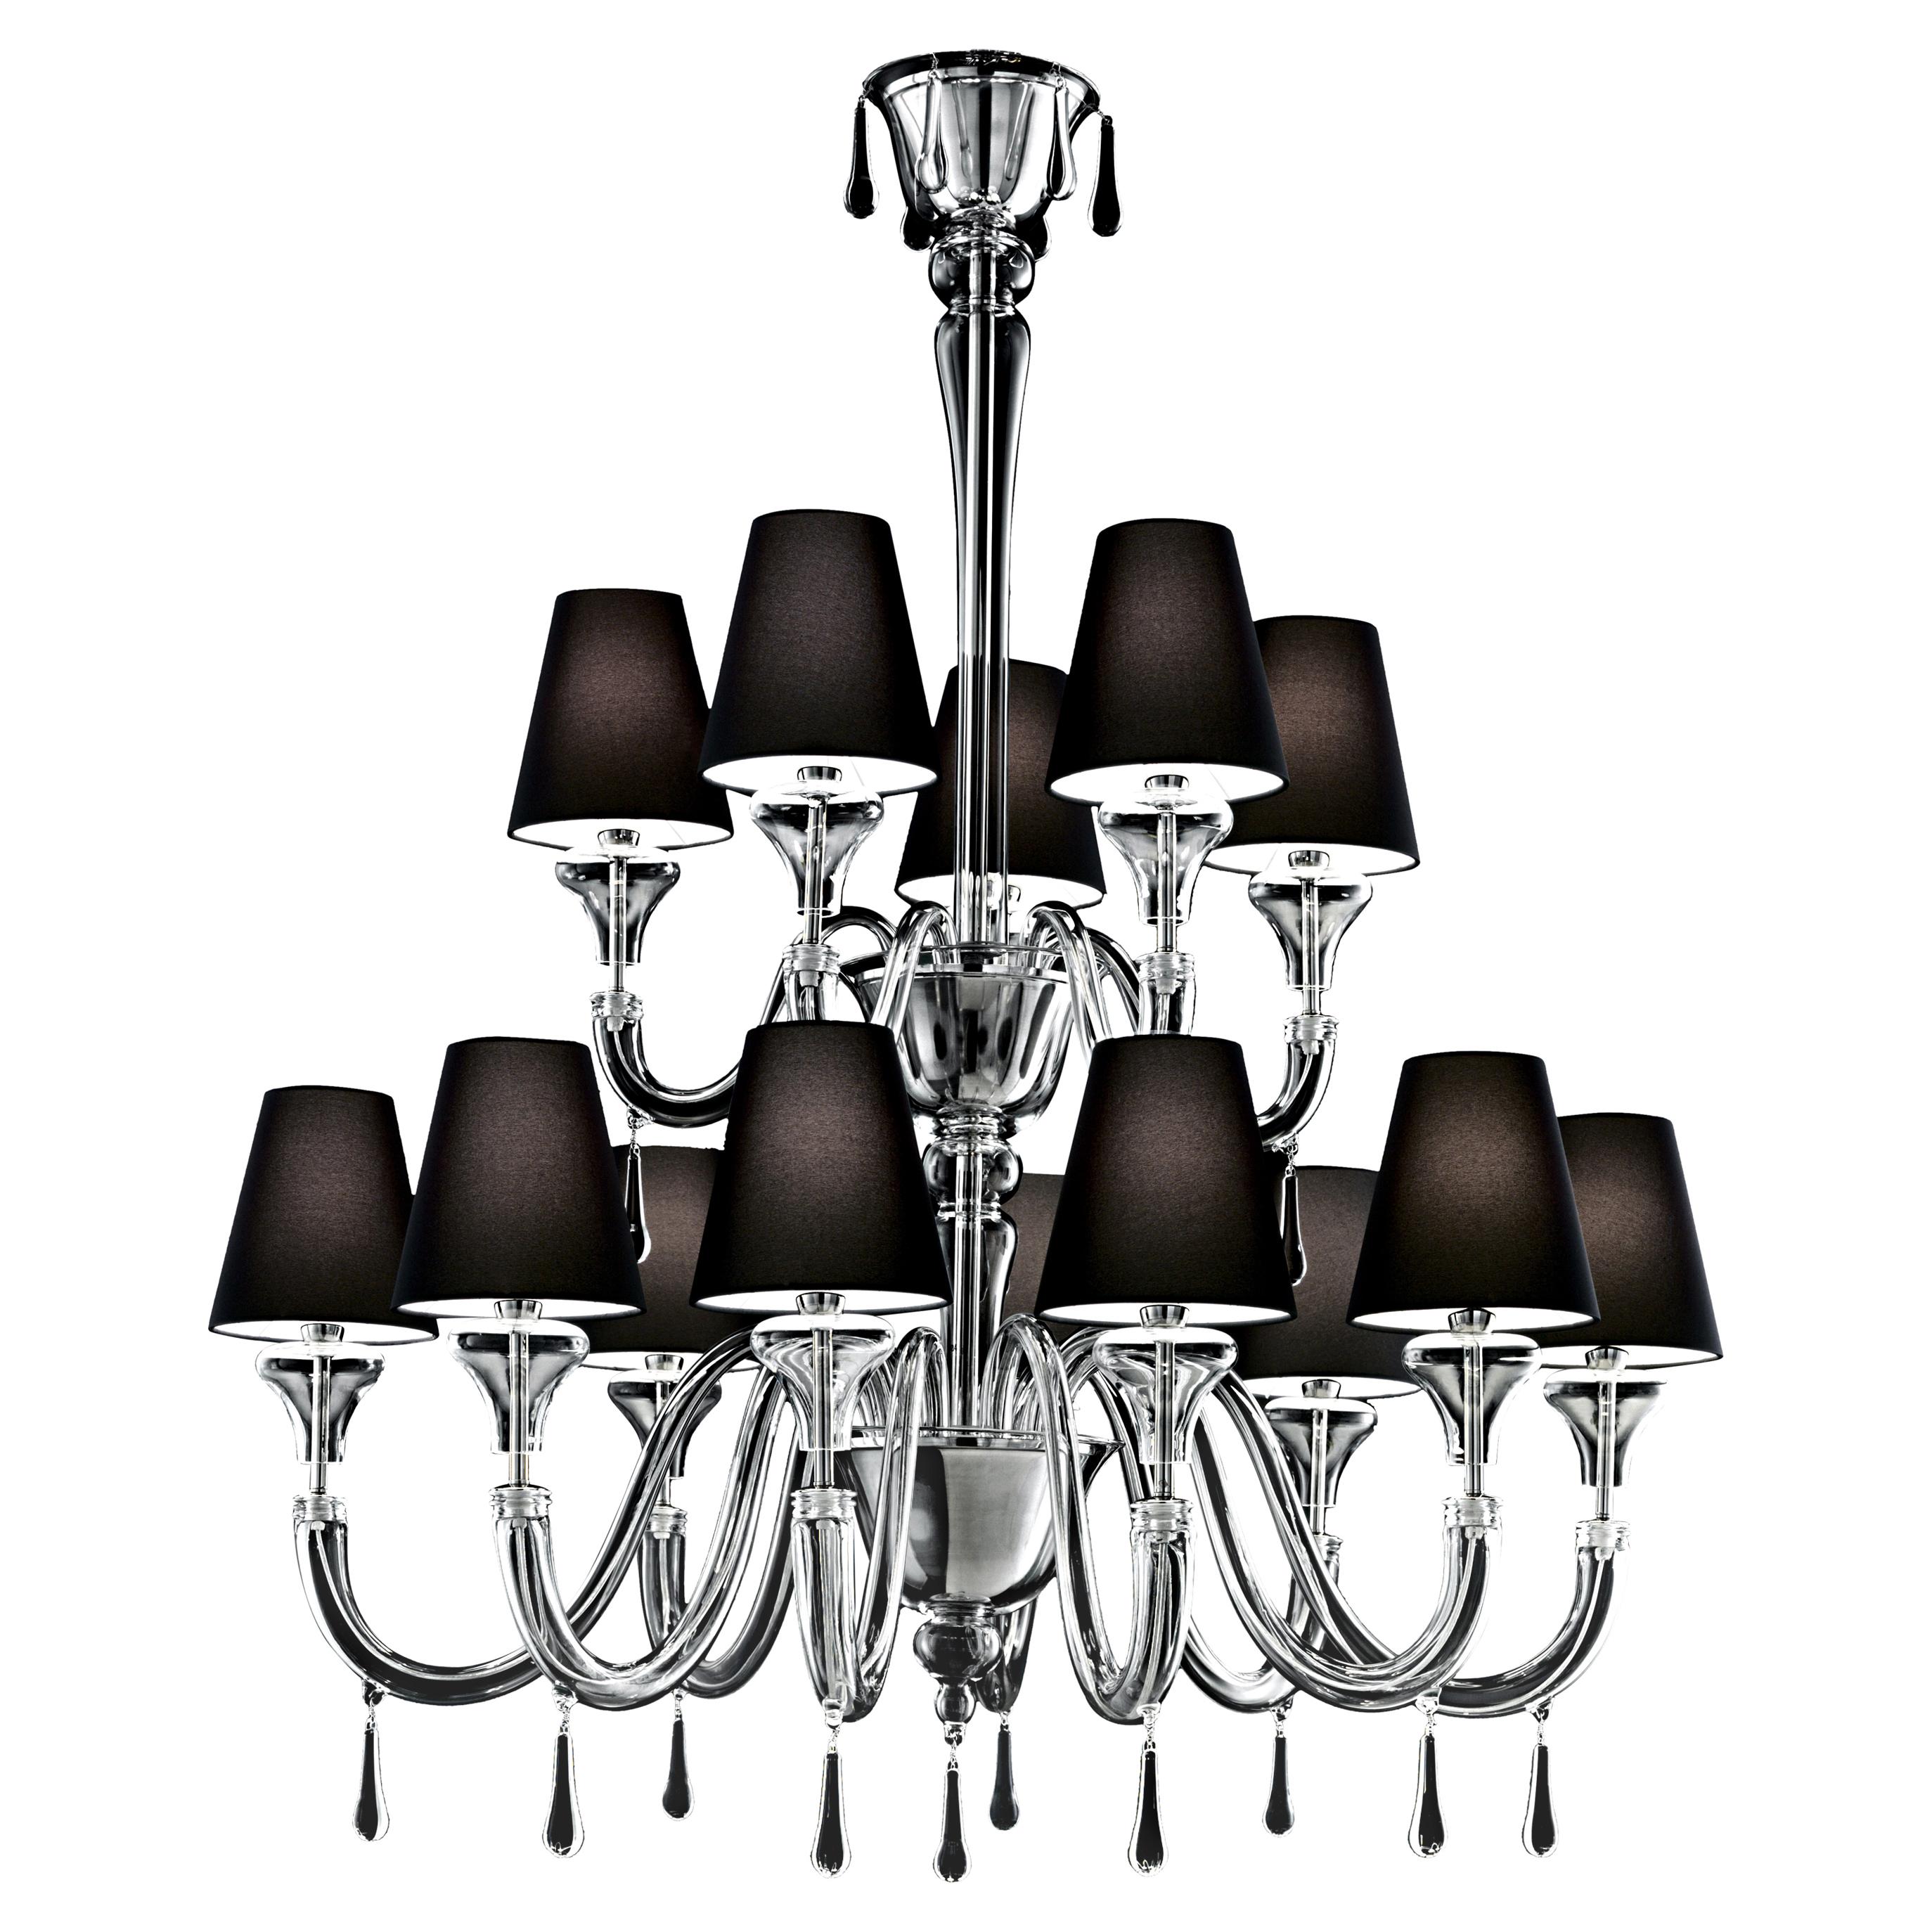 Clear (Crysral_CC) Maryland 5587 14 Chandelier in Glass with Black Shade, by Barovier&Toso